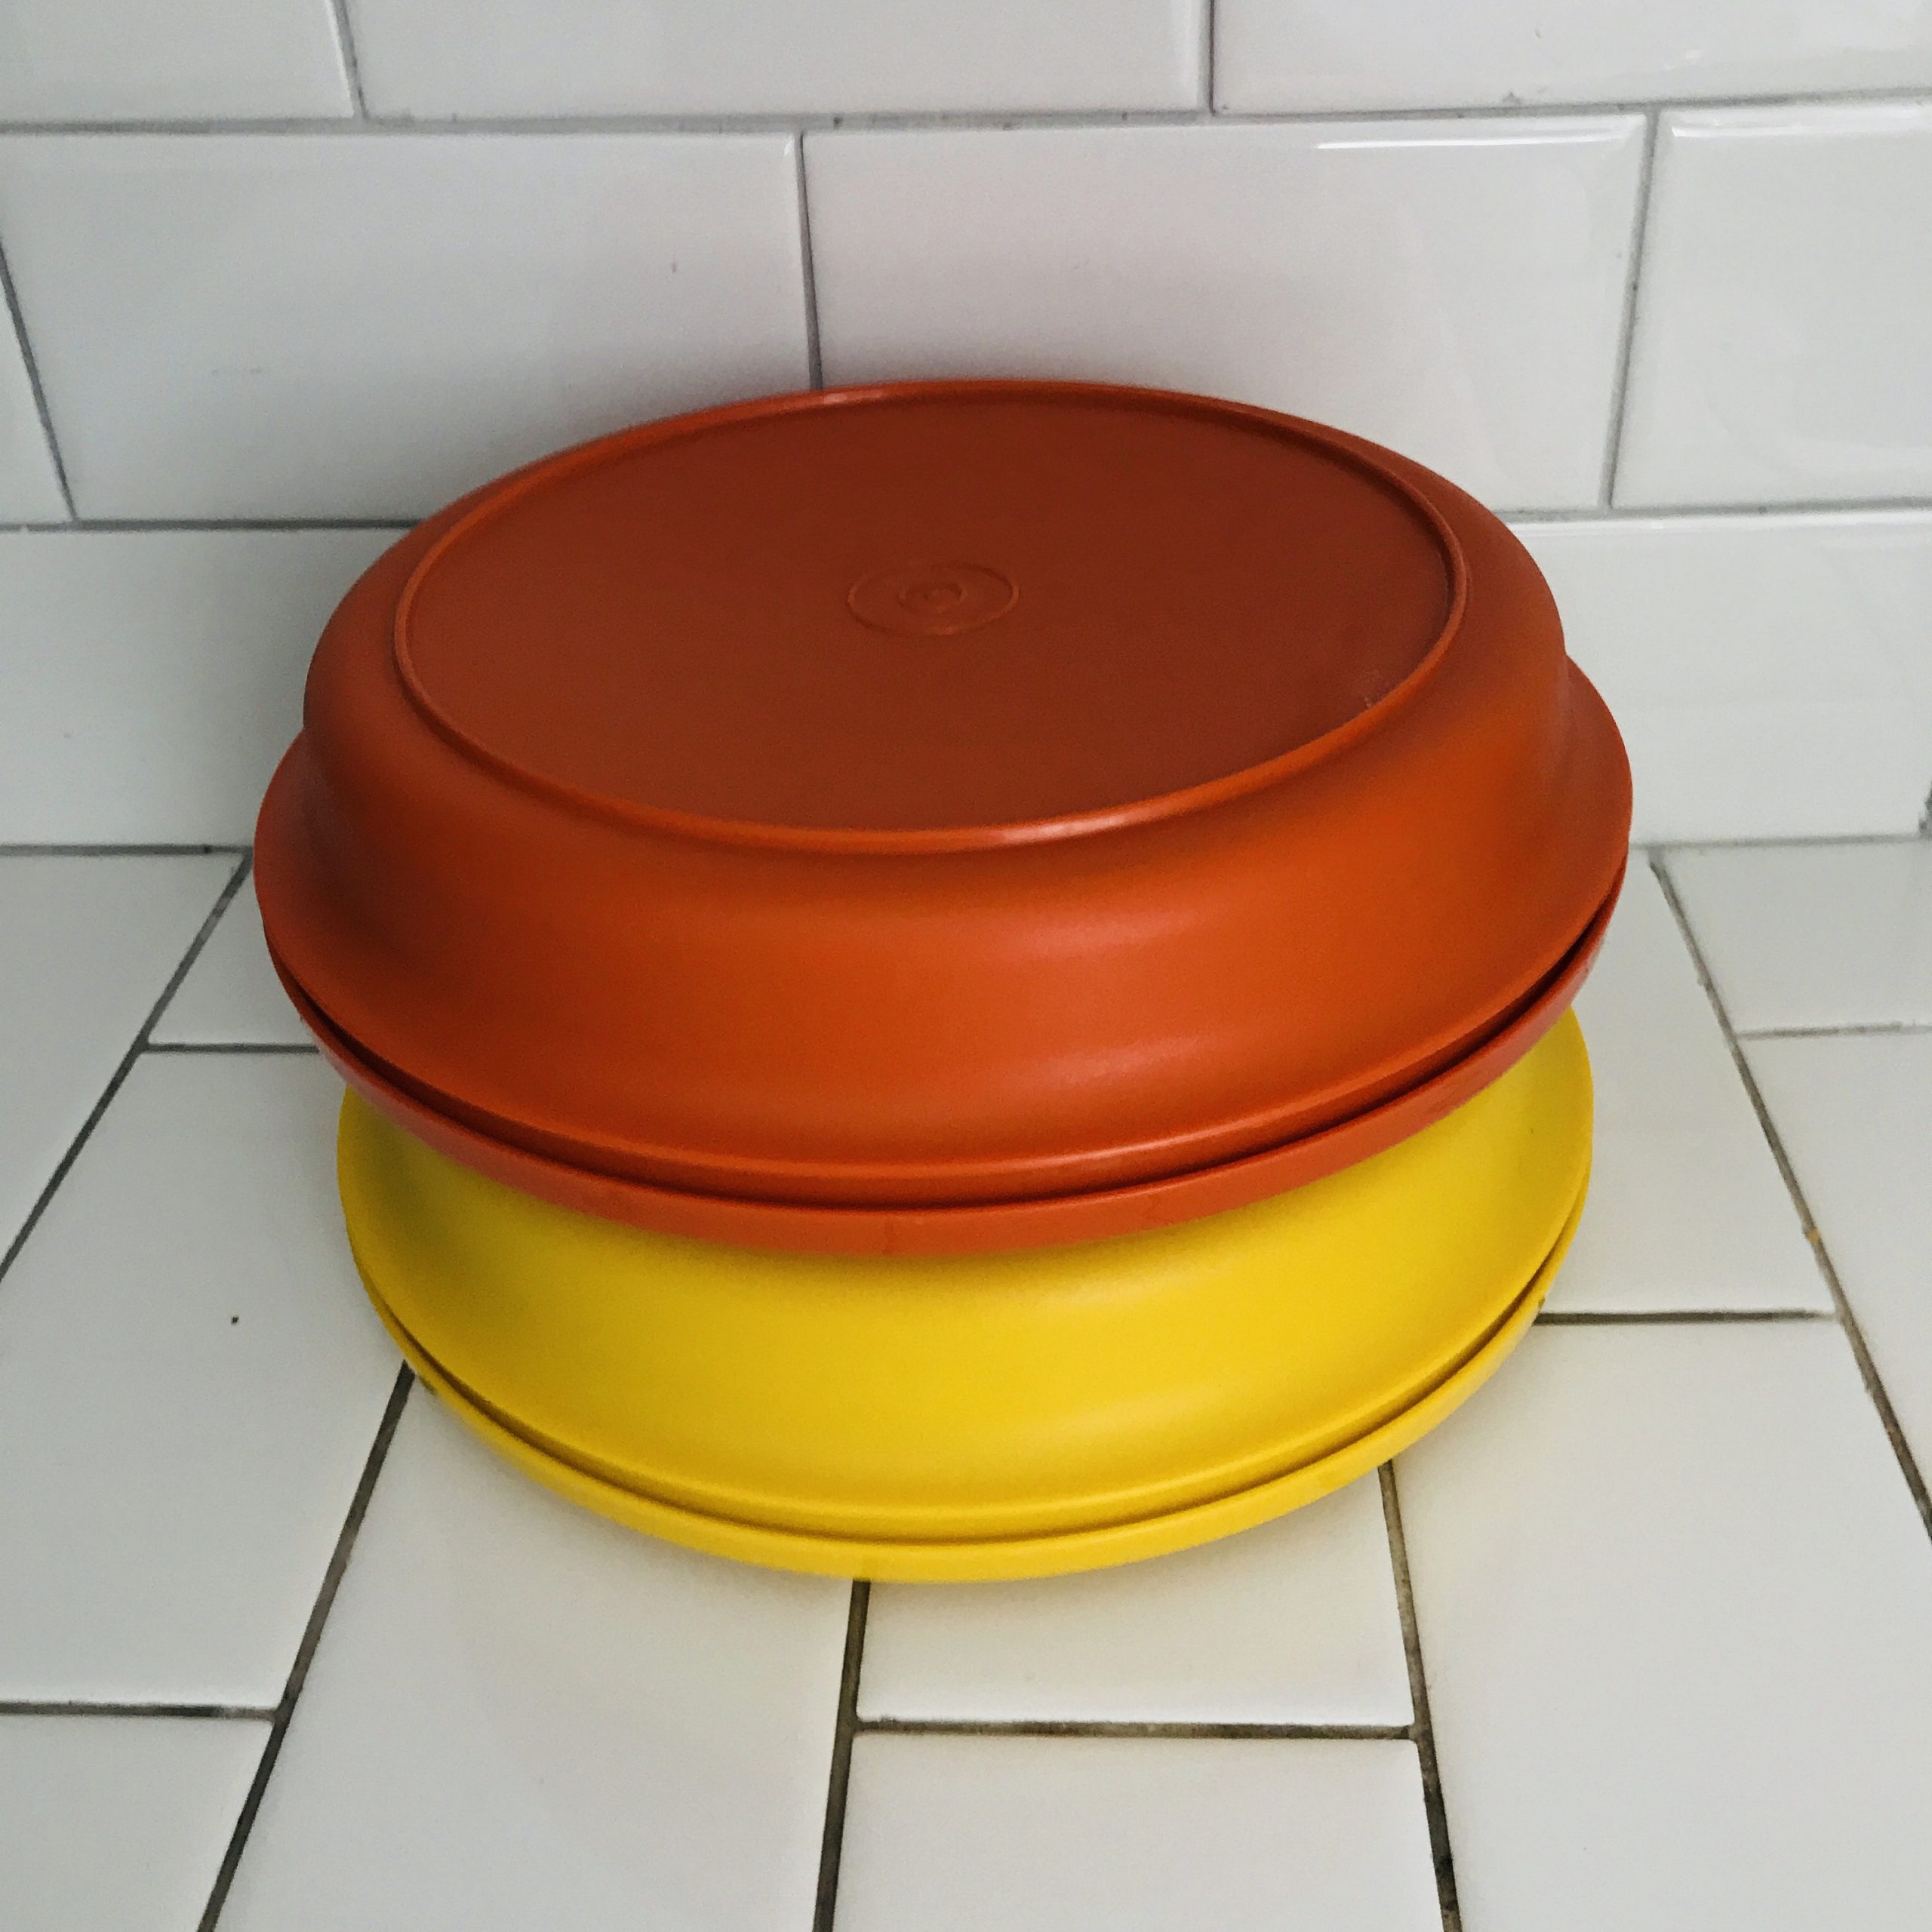 https://www.truevintageantiques.com/wp-content/uploads/2020/06/set-of-two-vintage-tupperware-seal-and-serve-bowls-vintage-harvest-colors-collectible-display-kitchen-storage-farmhouse-cottage-5eee7c1f3-scaled.jpg